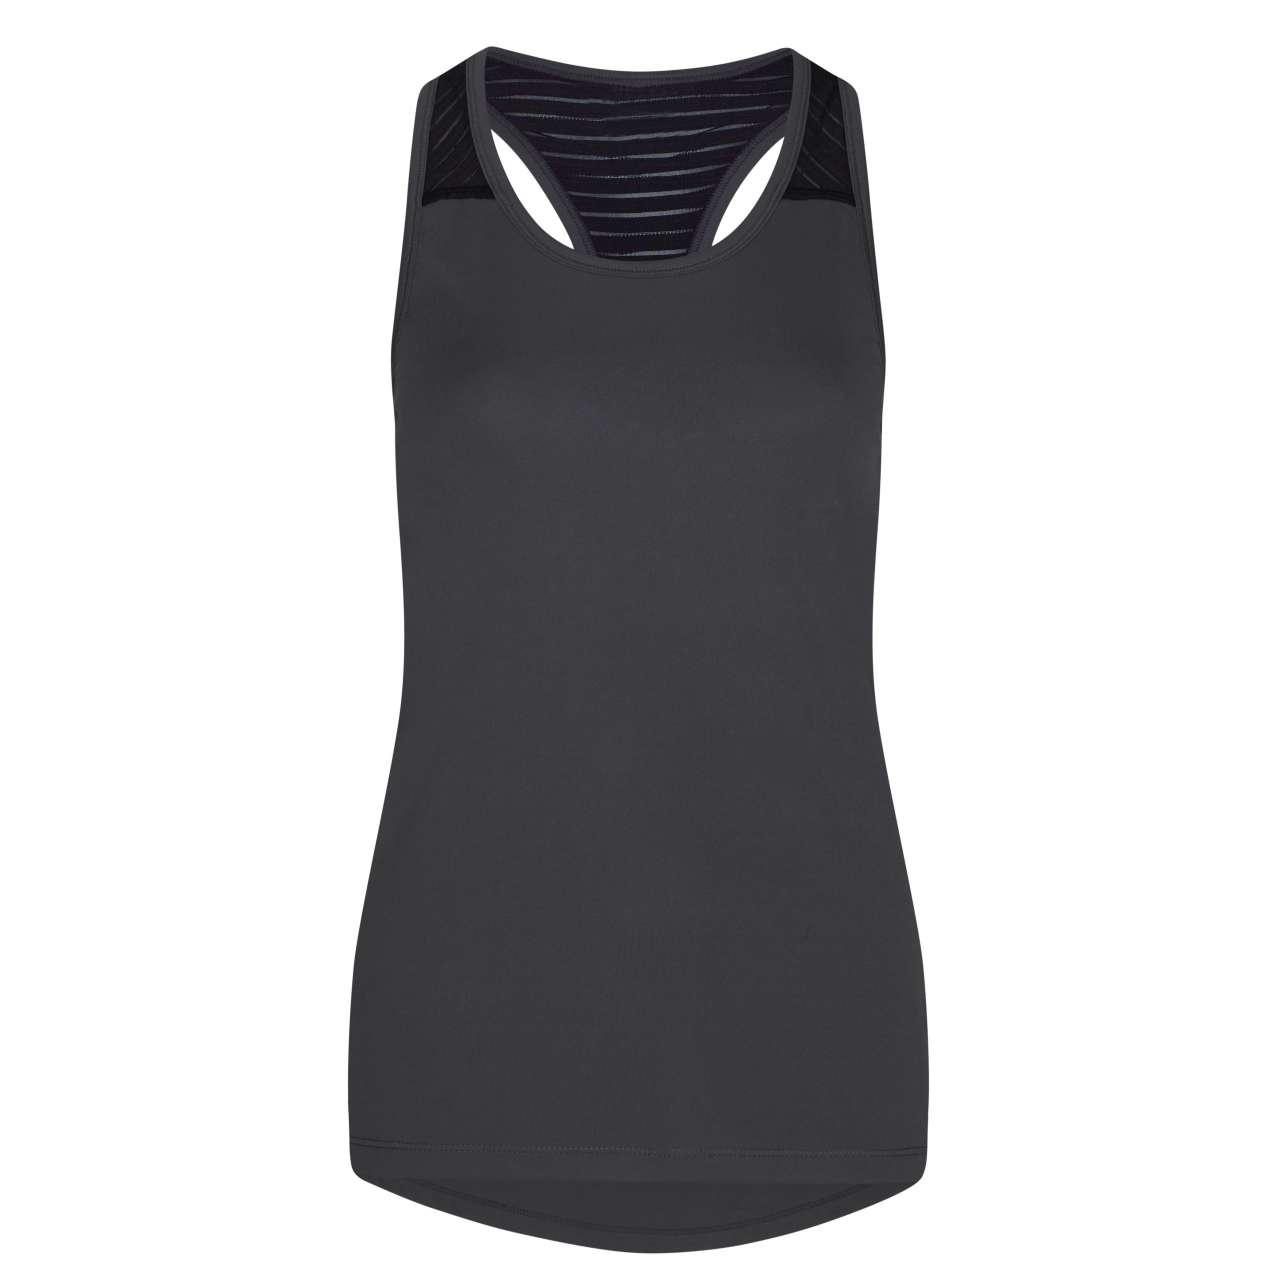 WOMEN'S COOL SMOOTH WORKOUT VEST